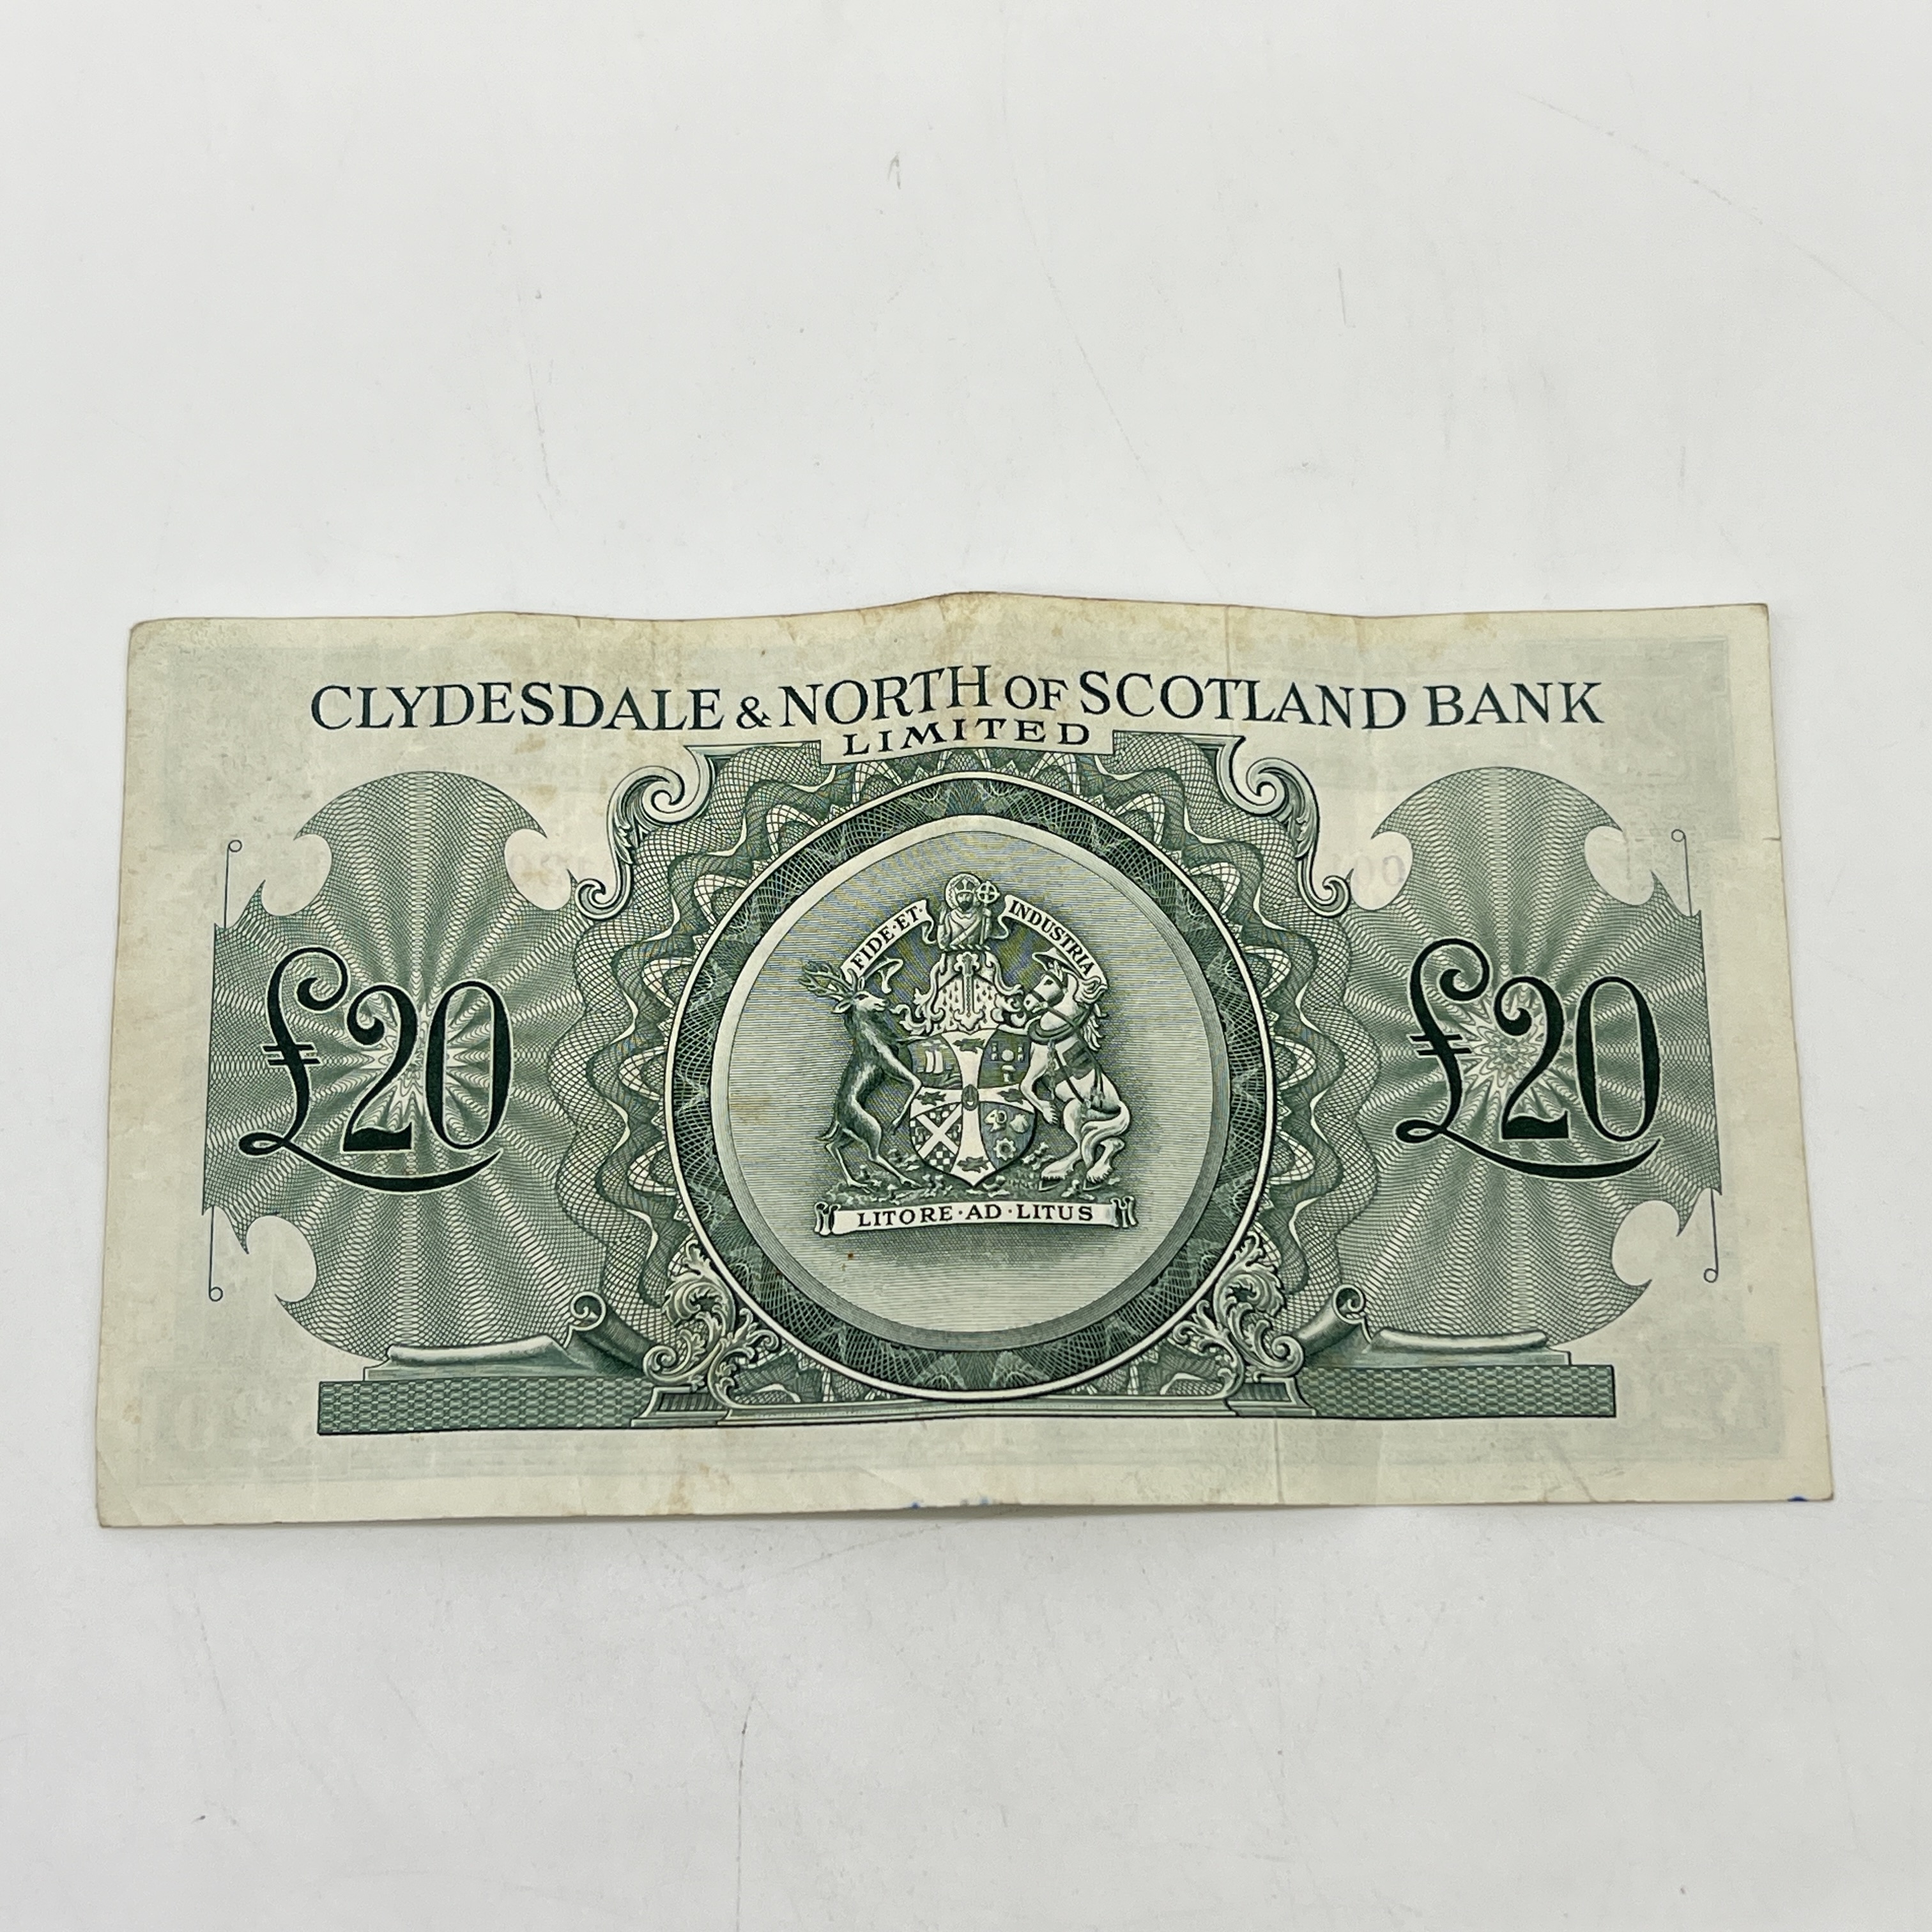 A Â£20 Clydesdale & North of Scotland bank note - Image 2 of 2